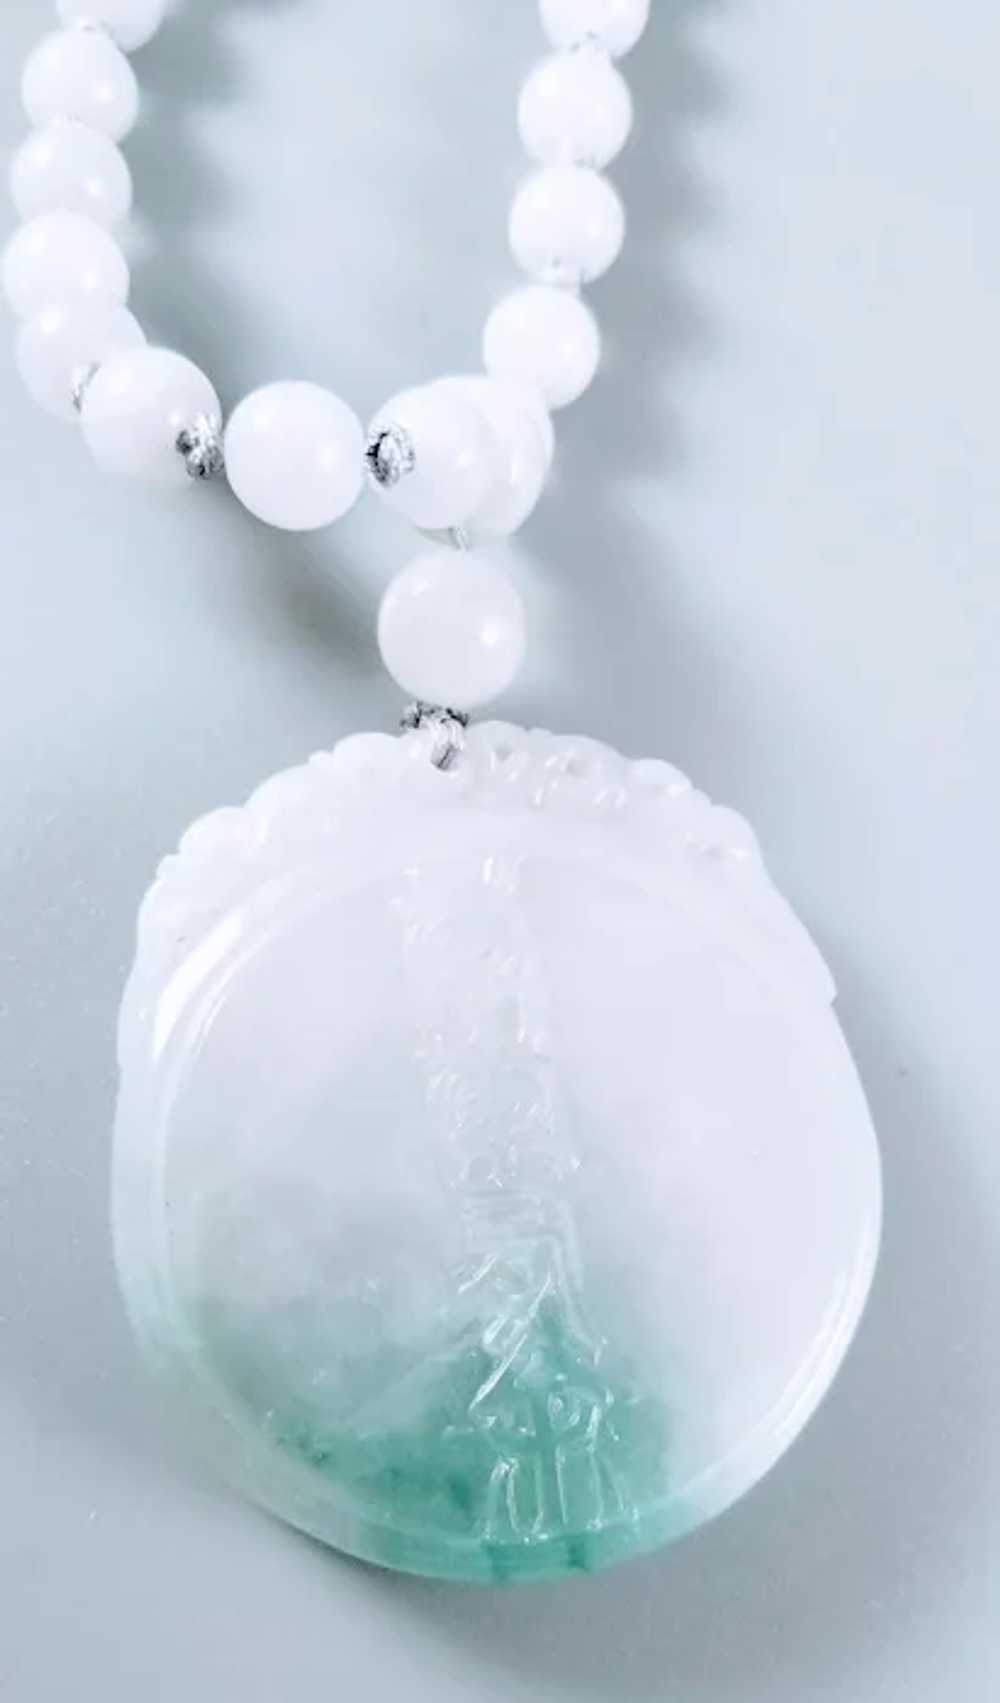 Jadeite Pendant Necklace and Beads Necklace, 28" - image 3